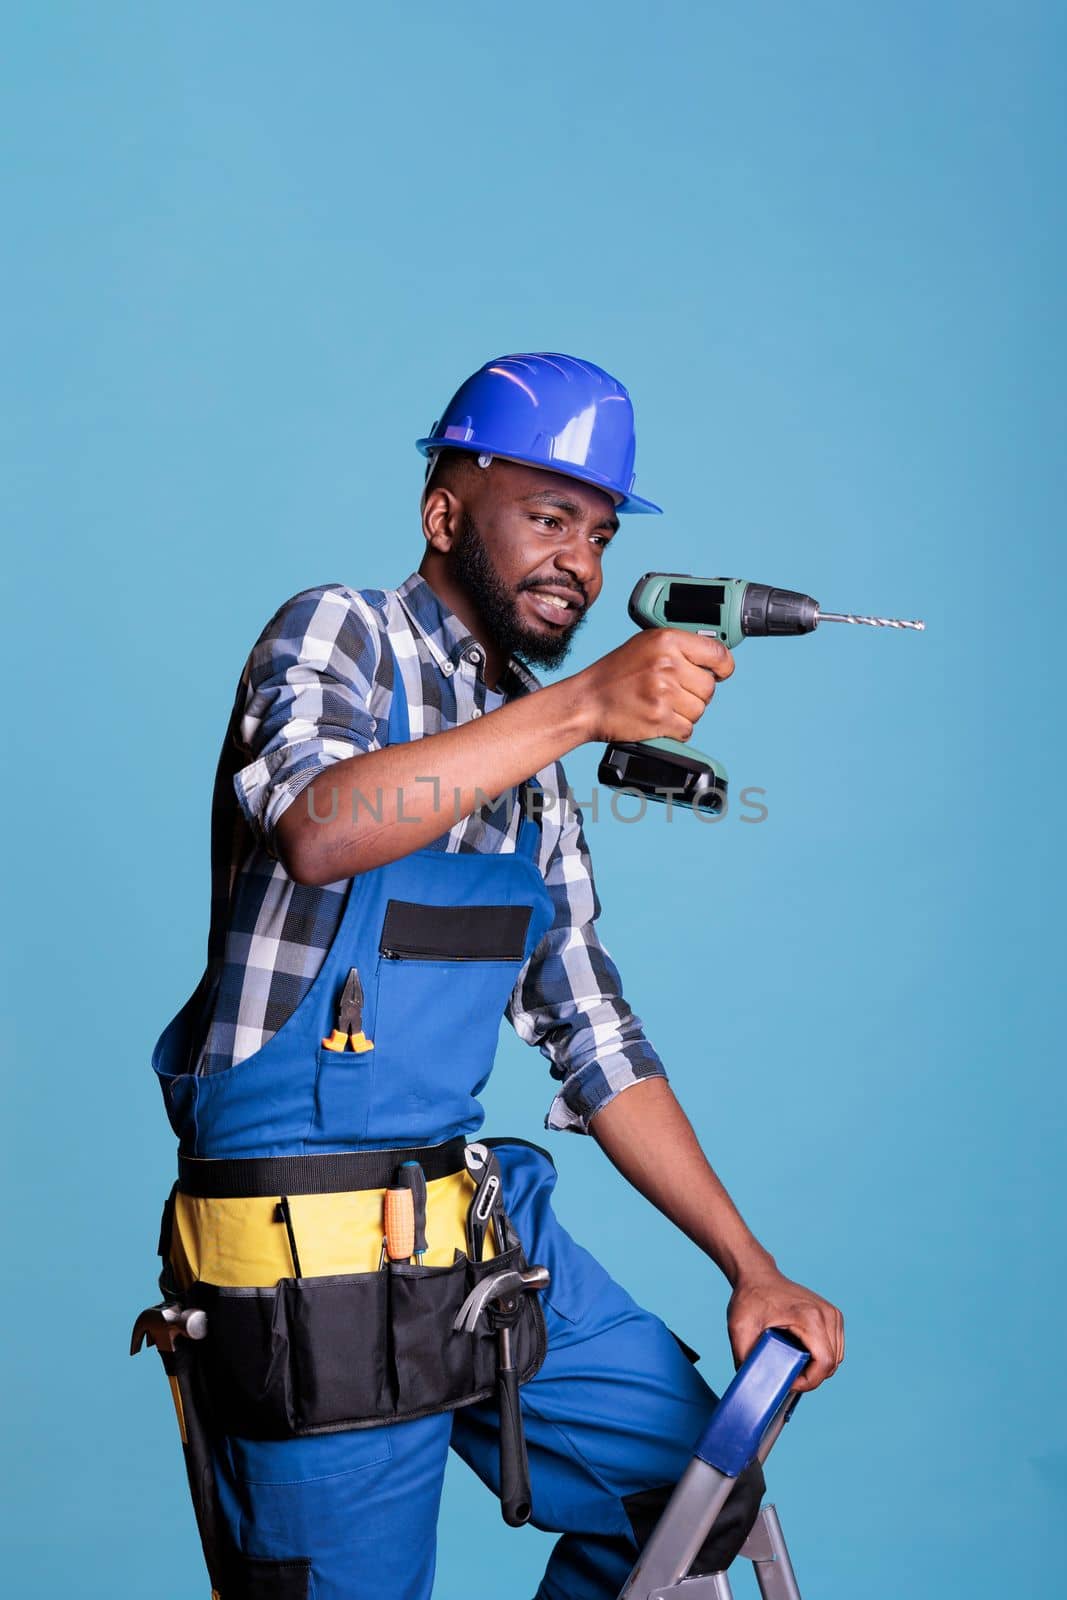 Construction worker on ladder drilling wall with cordless drill wearing work uniform and hard hat. African american man in studio shot against blue background, construction and renovation concept.